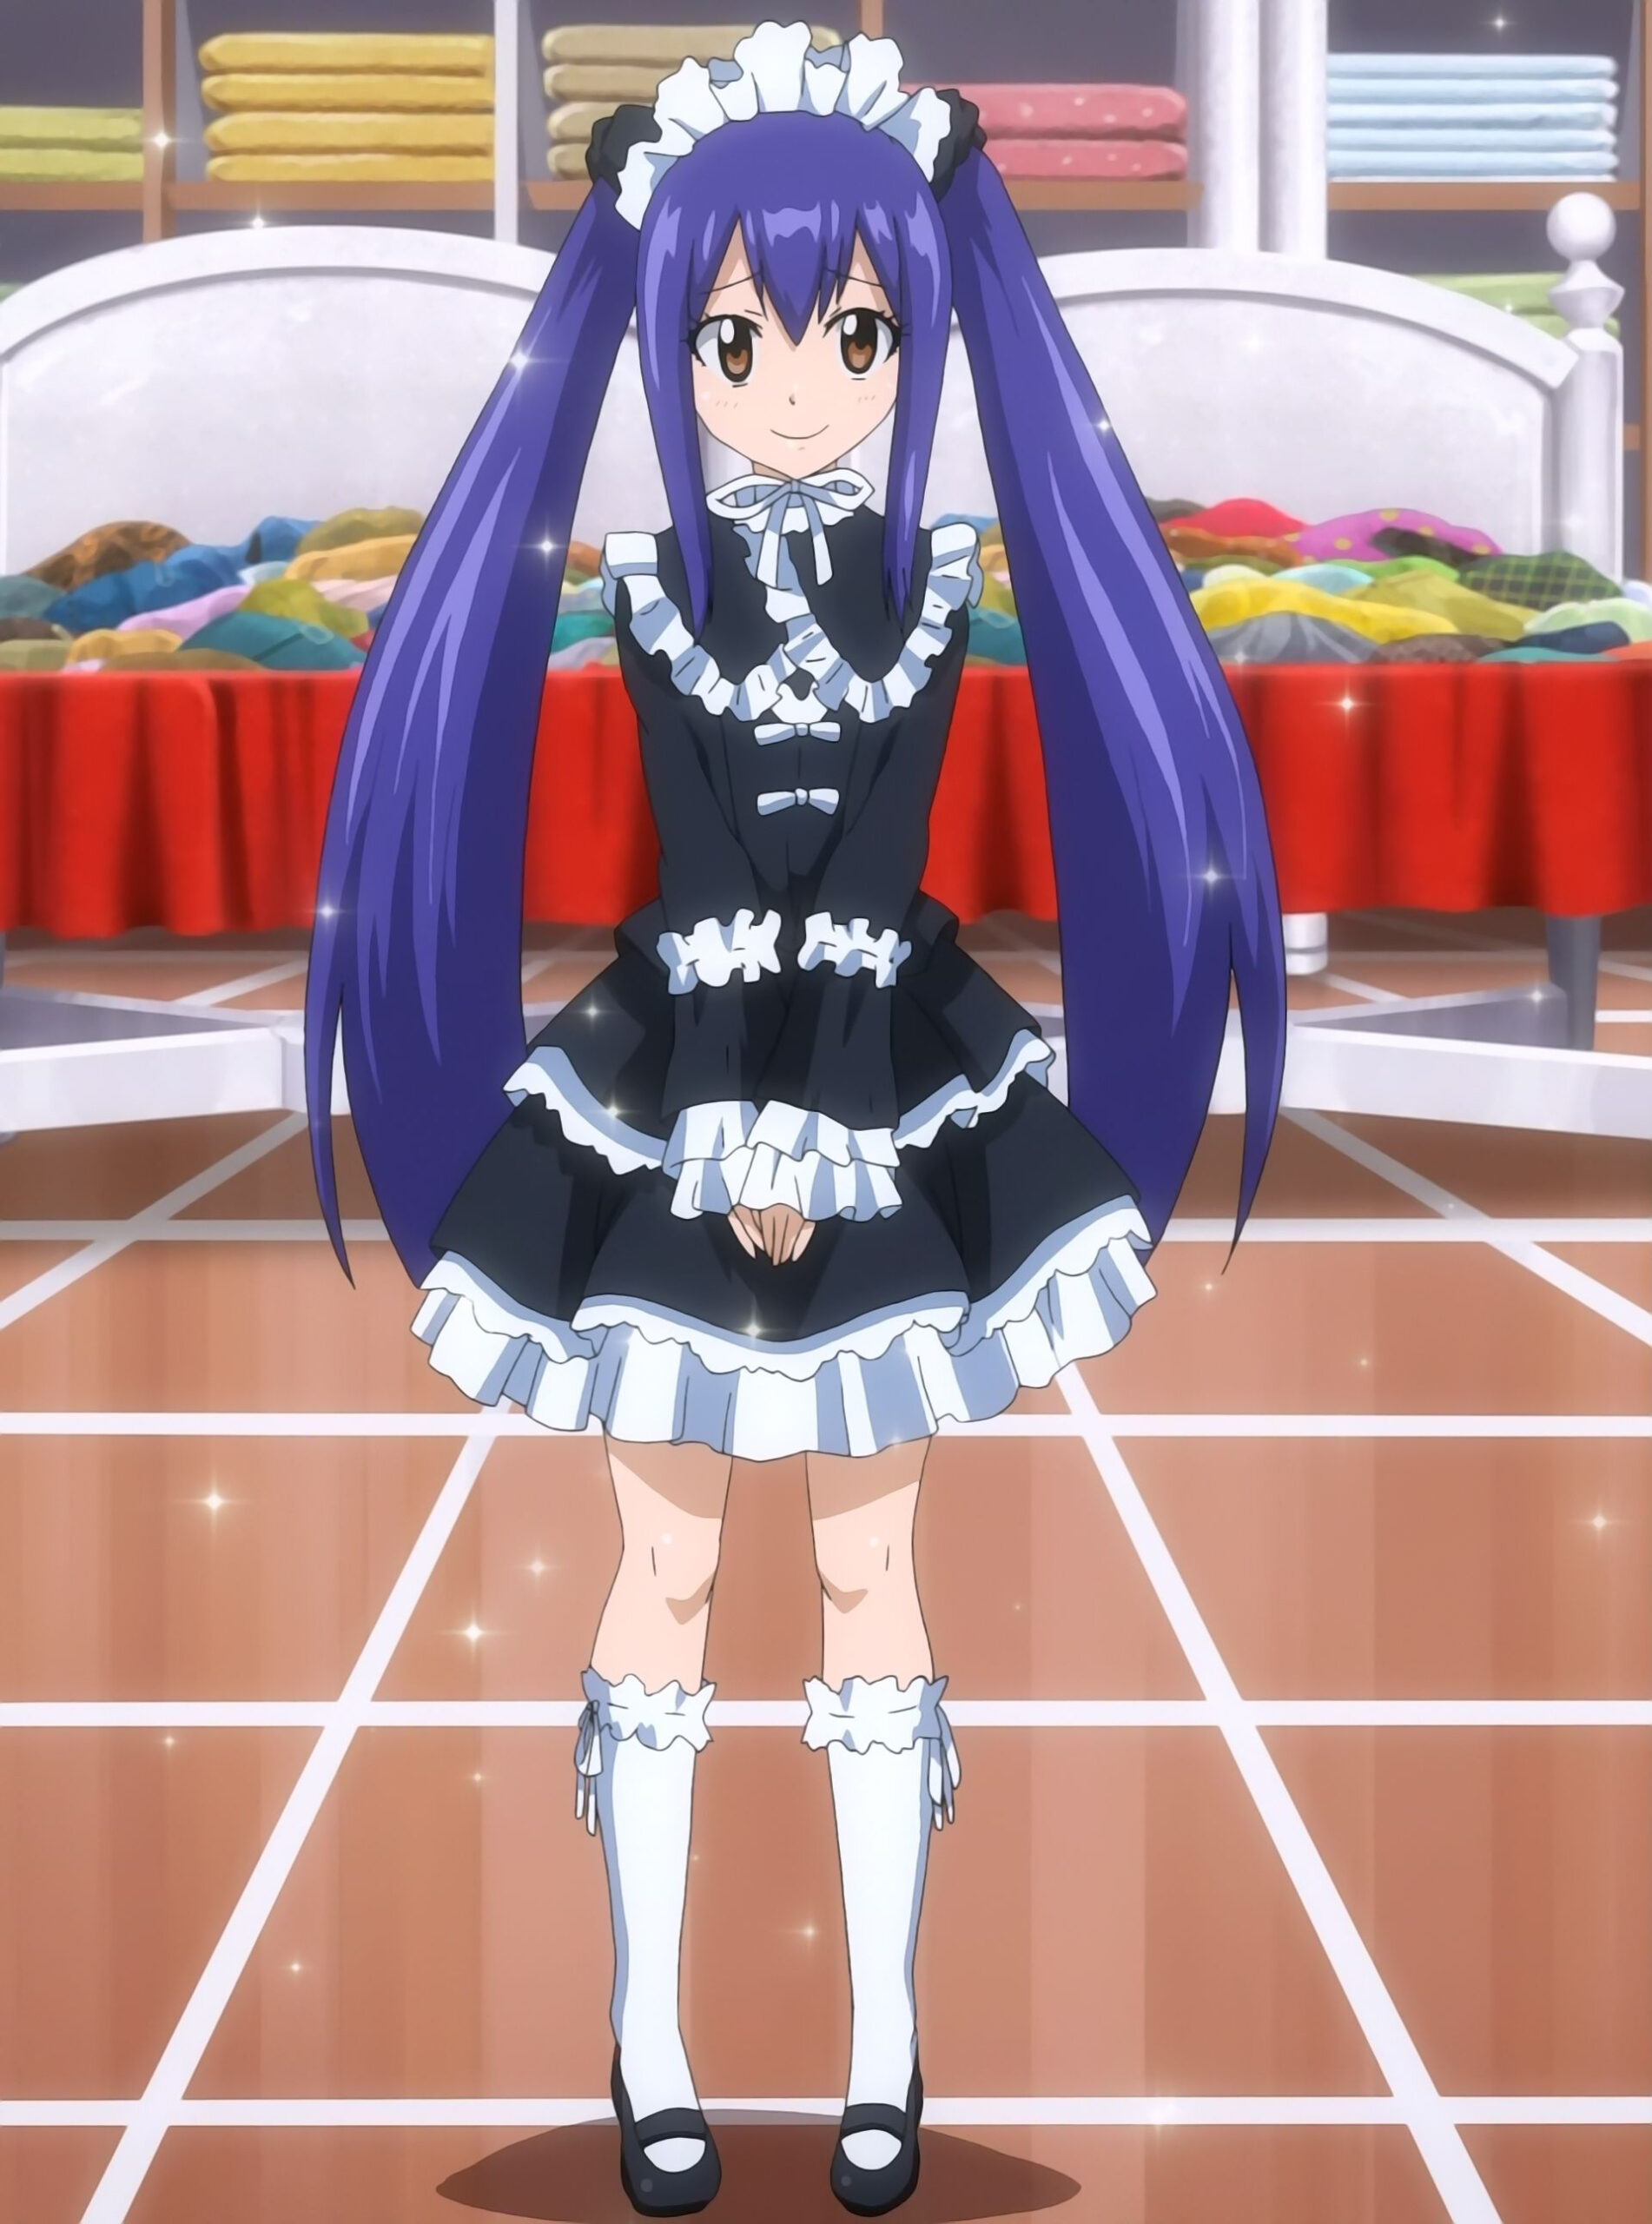 Wendy Marvell || Fairy Tail #Wendy #Fairytail #Animegirl #Anime #Manga destiné Wendy Fairy Tail Dessin